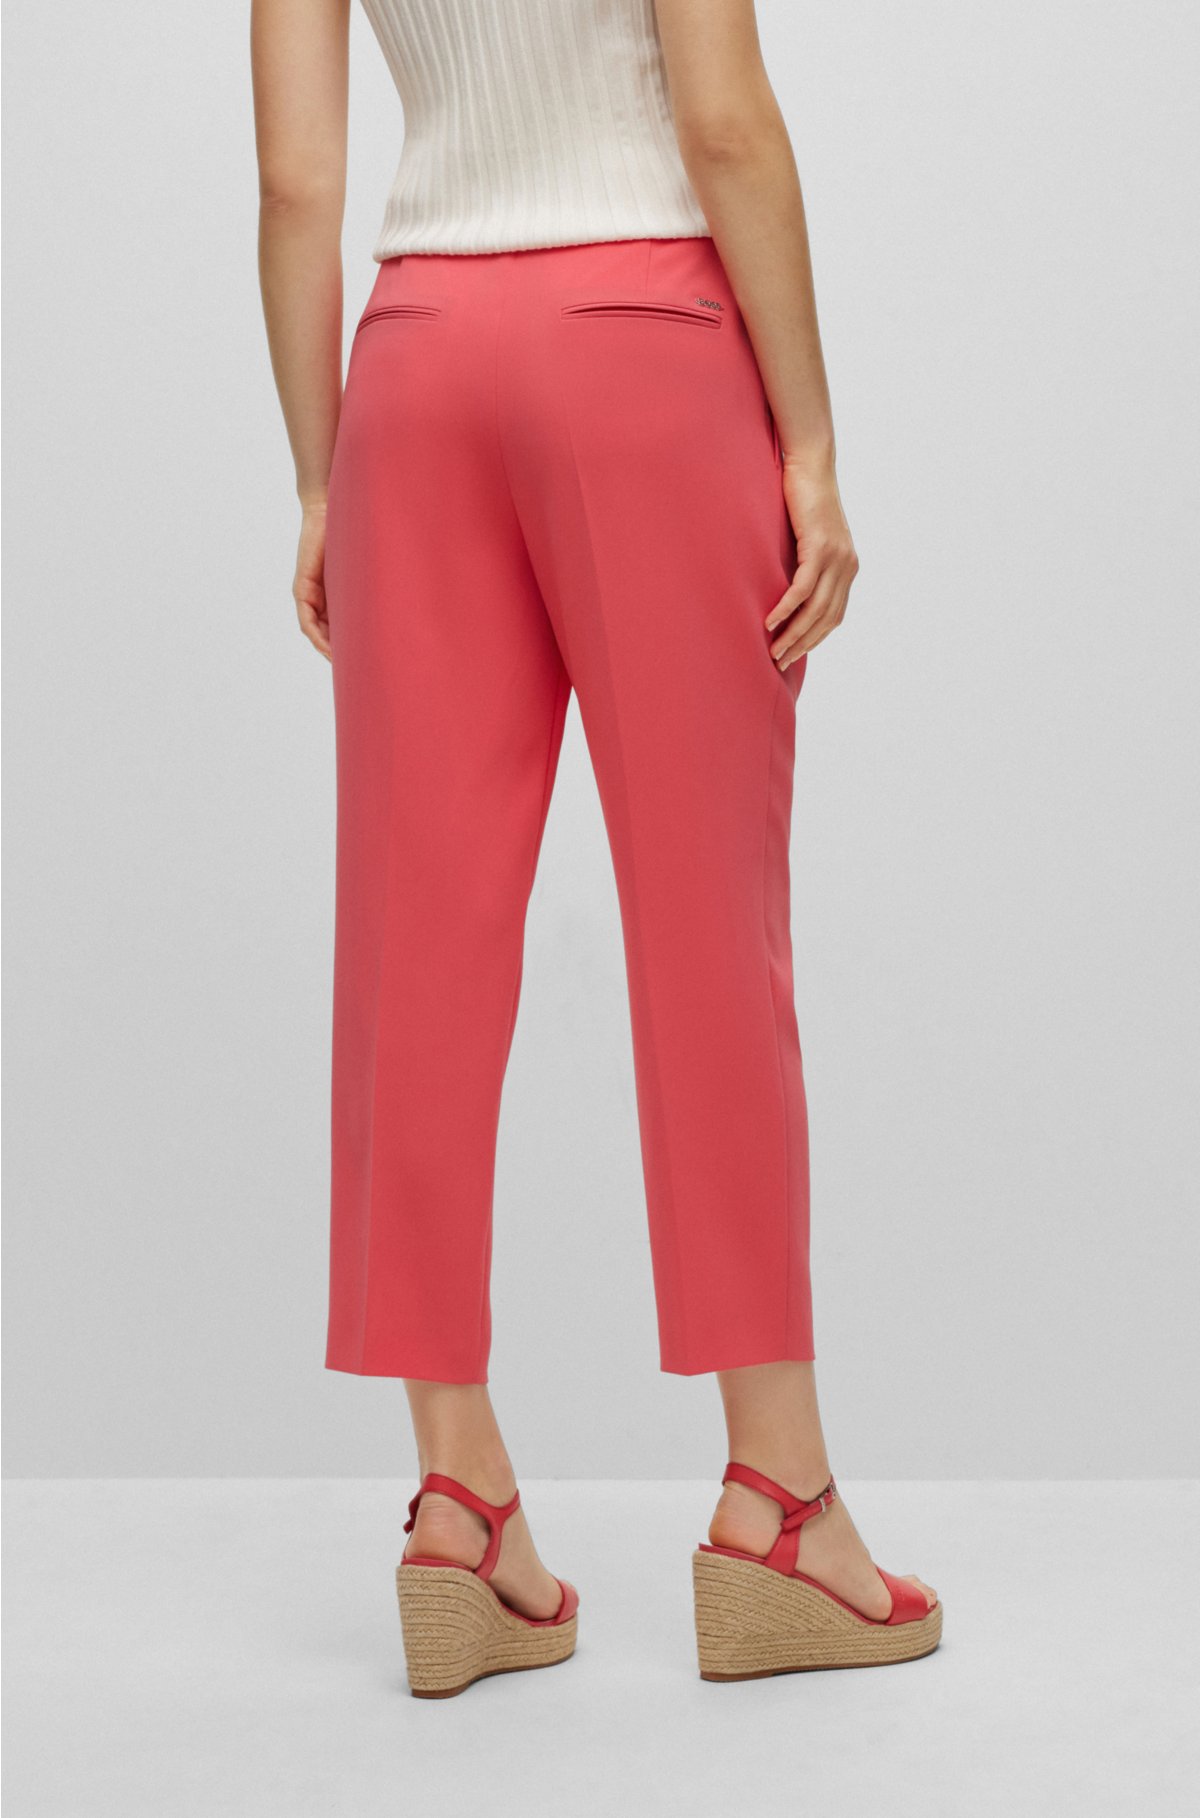 Shop Yours Clothing Women's High Waisted Skinny Trousers up to 60% Off